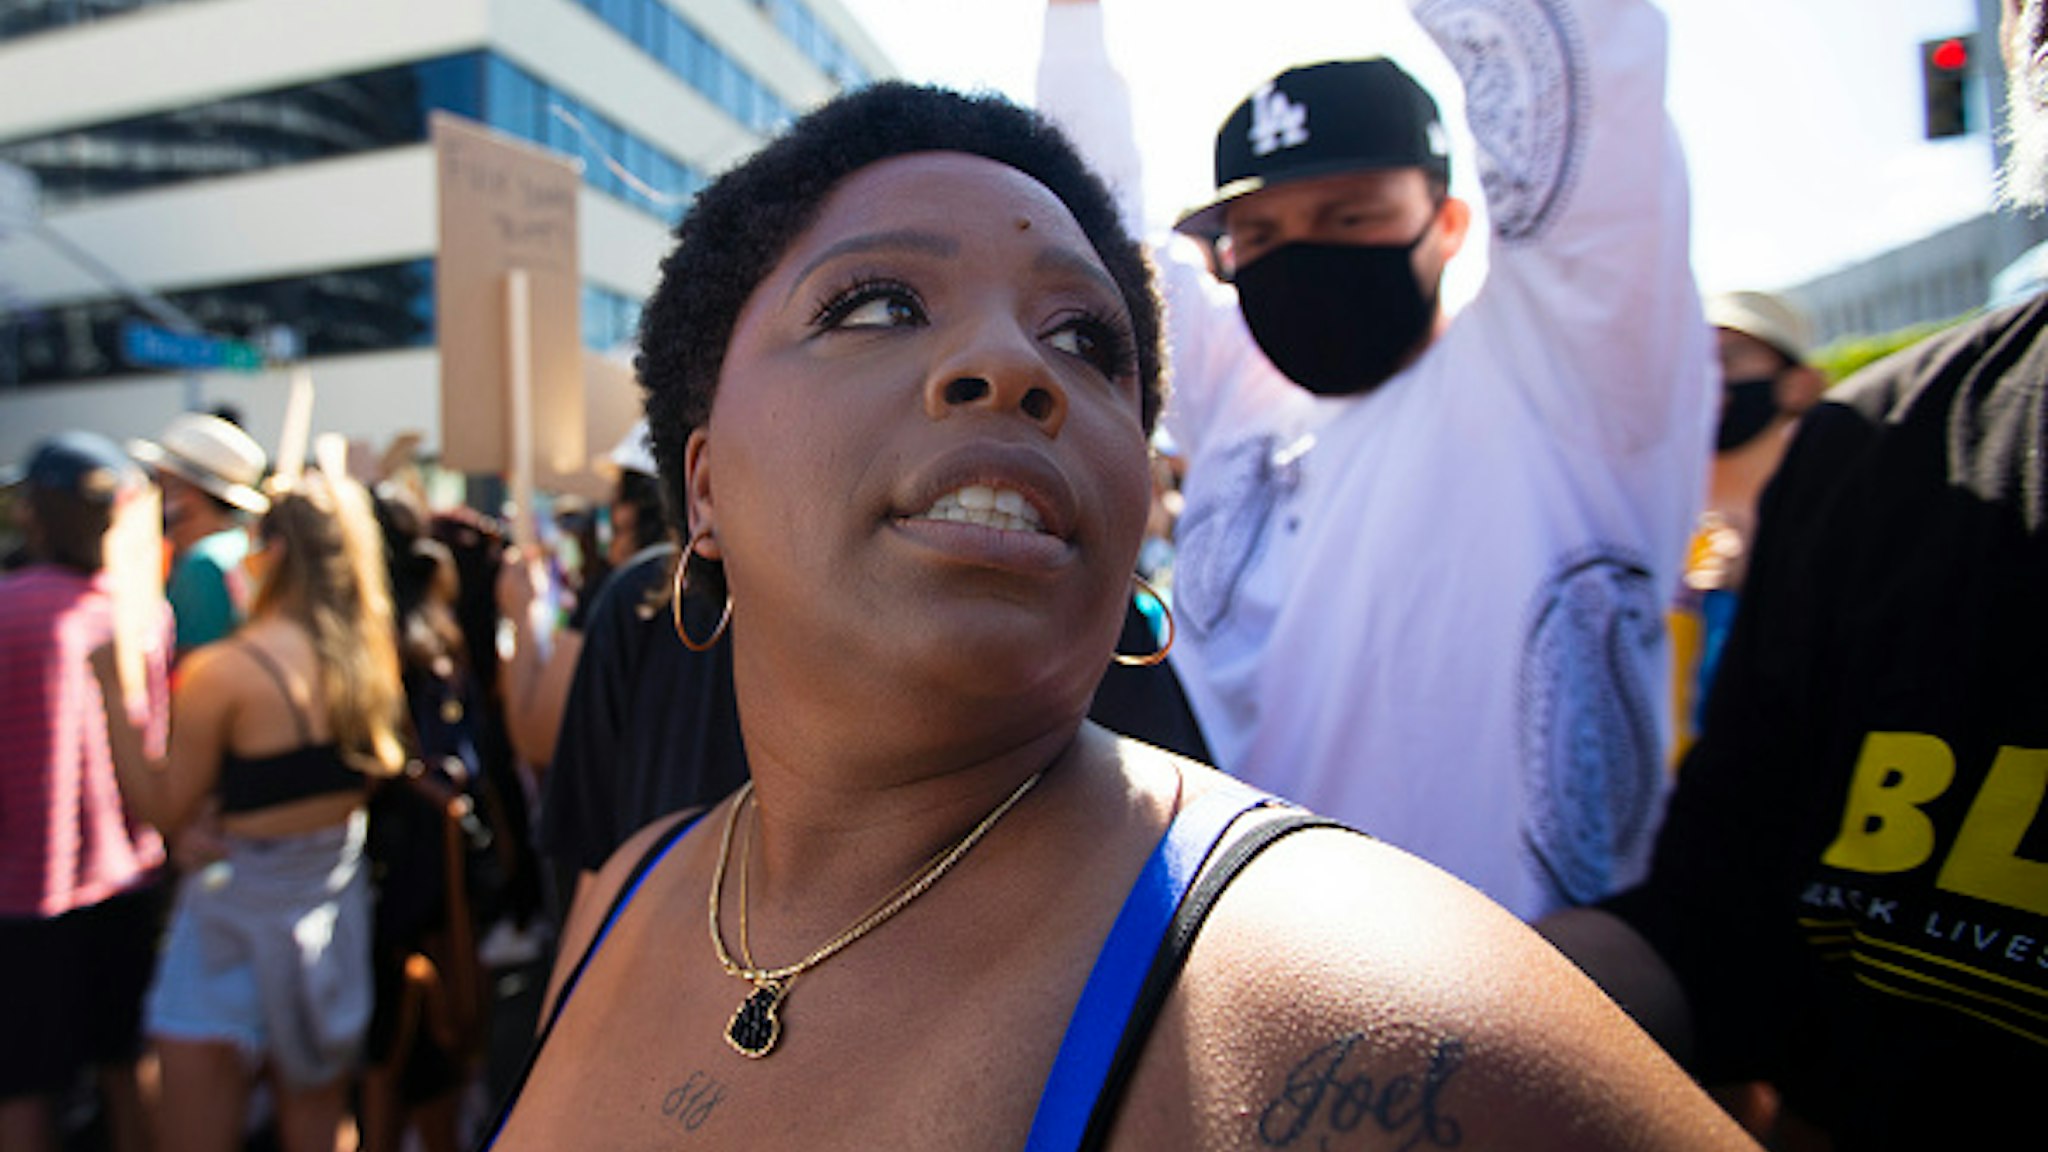 HOLLYWOOD, CA JUNE 7, 2020: Patrisse Cullors is one of the three co-founders of the Black Lives Matter movement. She participated in the peaceful march in Hollywood, CA today Sunday June 7, 2020. Thousands of people participated in todays peaceful protest against police sparked by the death of George Floyd.